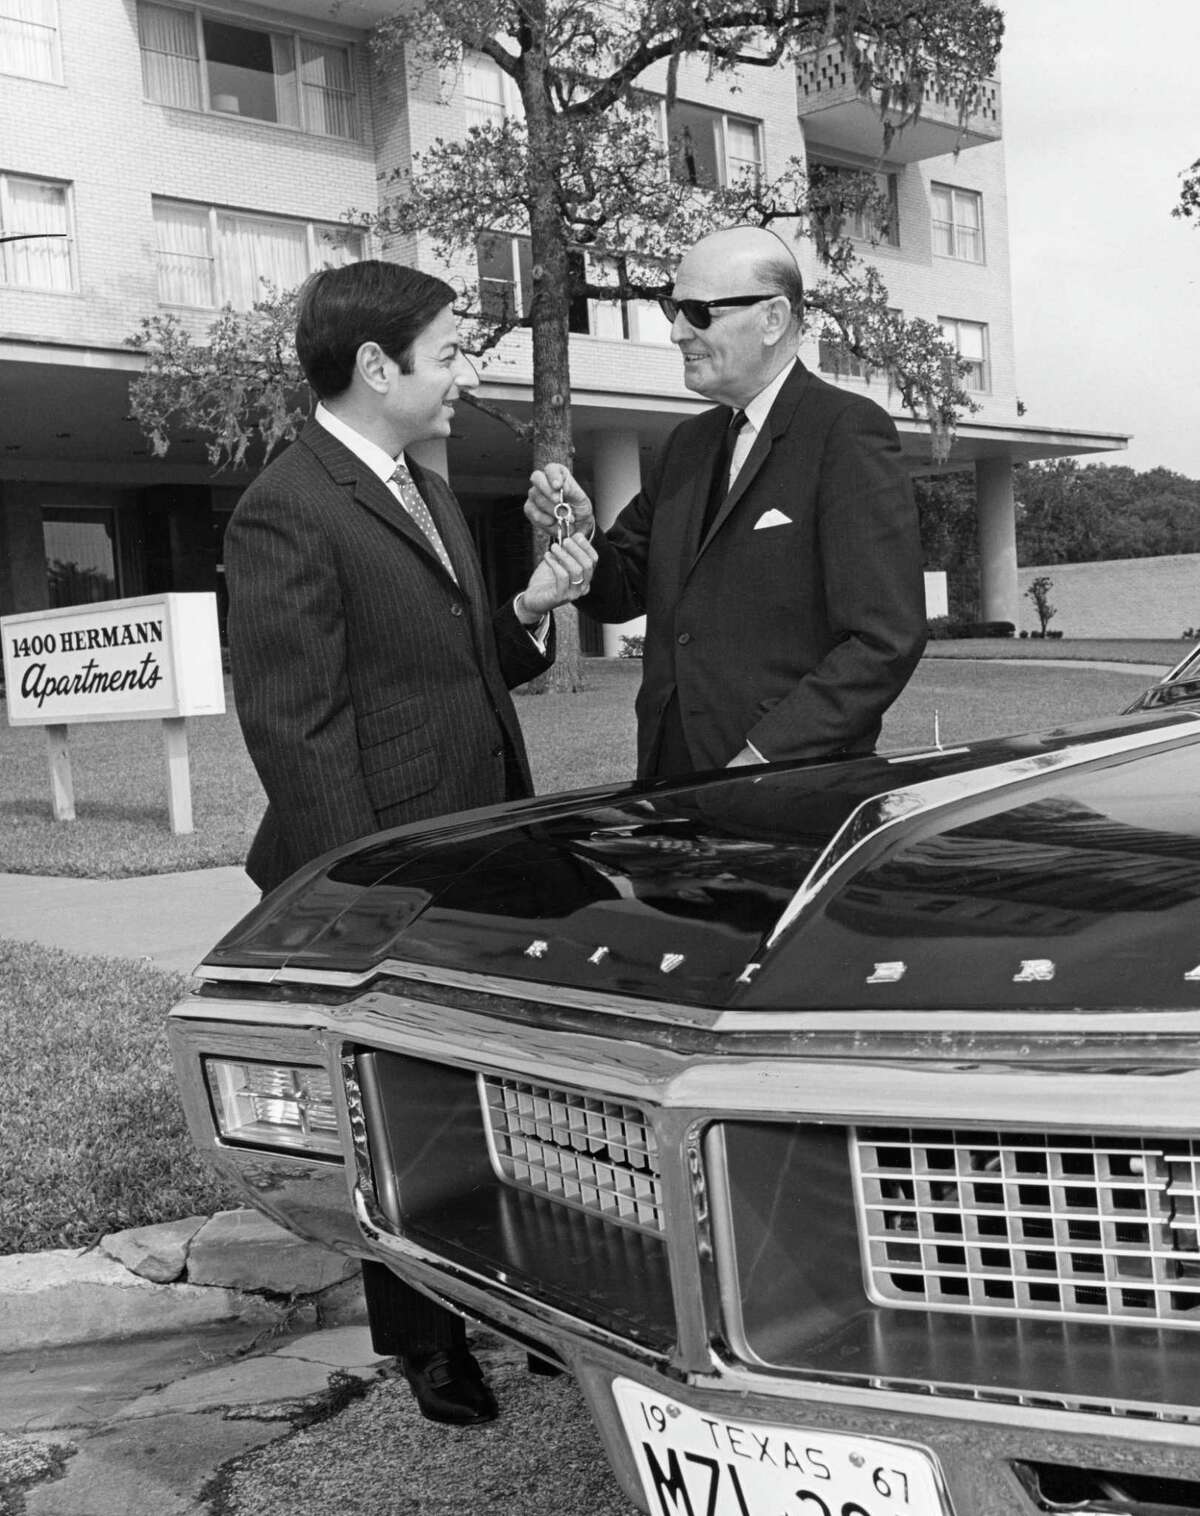 From the Oct. 1967 Houston Post: Houston symphony conductor Andre Previn, left, is riding in style while he is in town. Al Parker Buick owner Al Parker is shown giving him the keys to a new auto for his use while he is here.